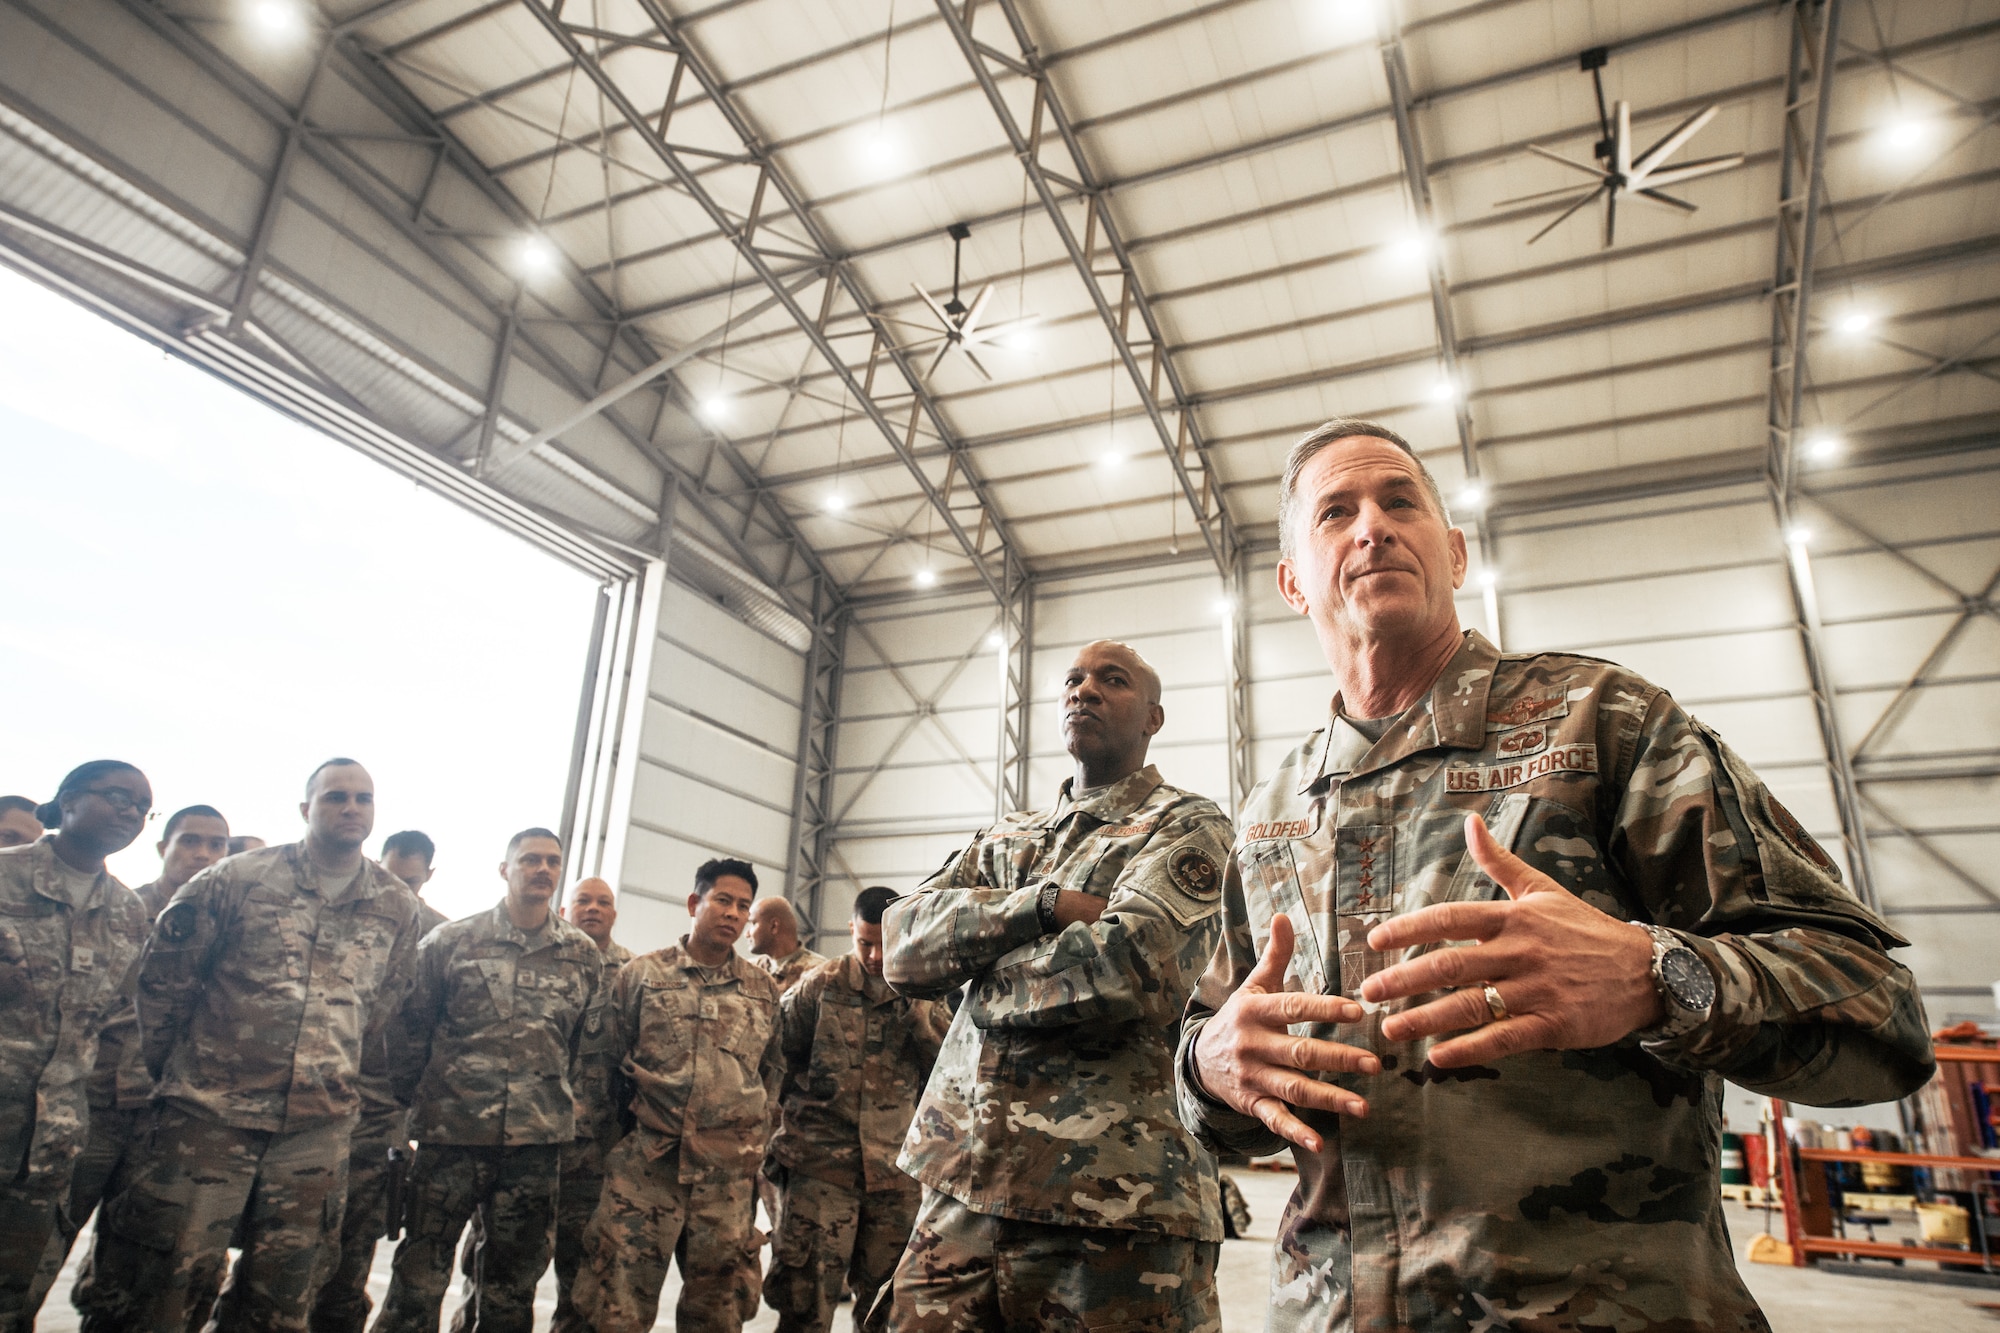 Air Force Chief of Staff Gen. David L. Goldfein and Chief Master Sgt. of the Air Force Kaleth O. Wright talk with deployed Airmen at an undisclosed location in Southwest Asia, Dec. 22, 2018. Goldfein and Wright, “The Chiefs Team,” visited Airmen throughout U.S. Central Command’s area of responsibility to offer guidance, thanks, and listen to Airmen. (U.S. Air Force photo by Staff Sgt. Jordan Castelan)